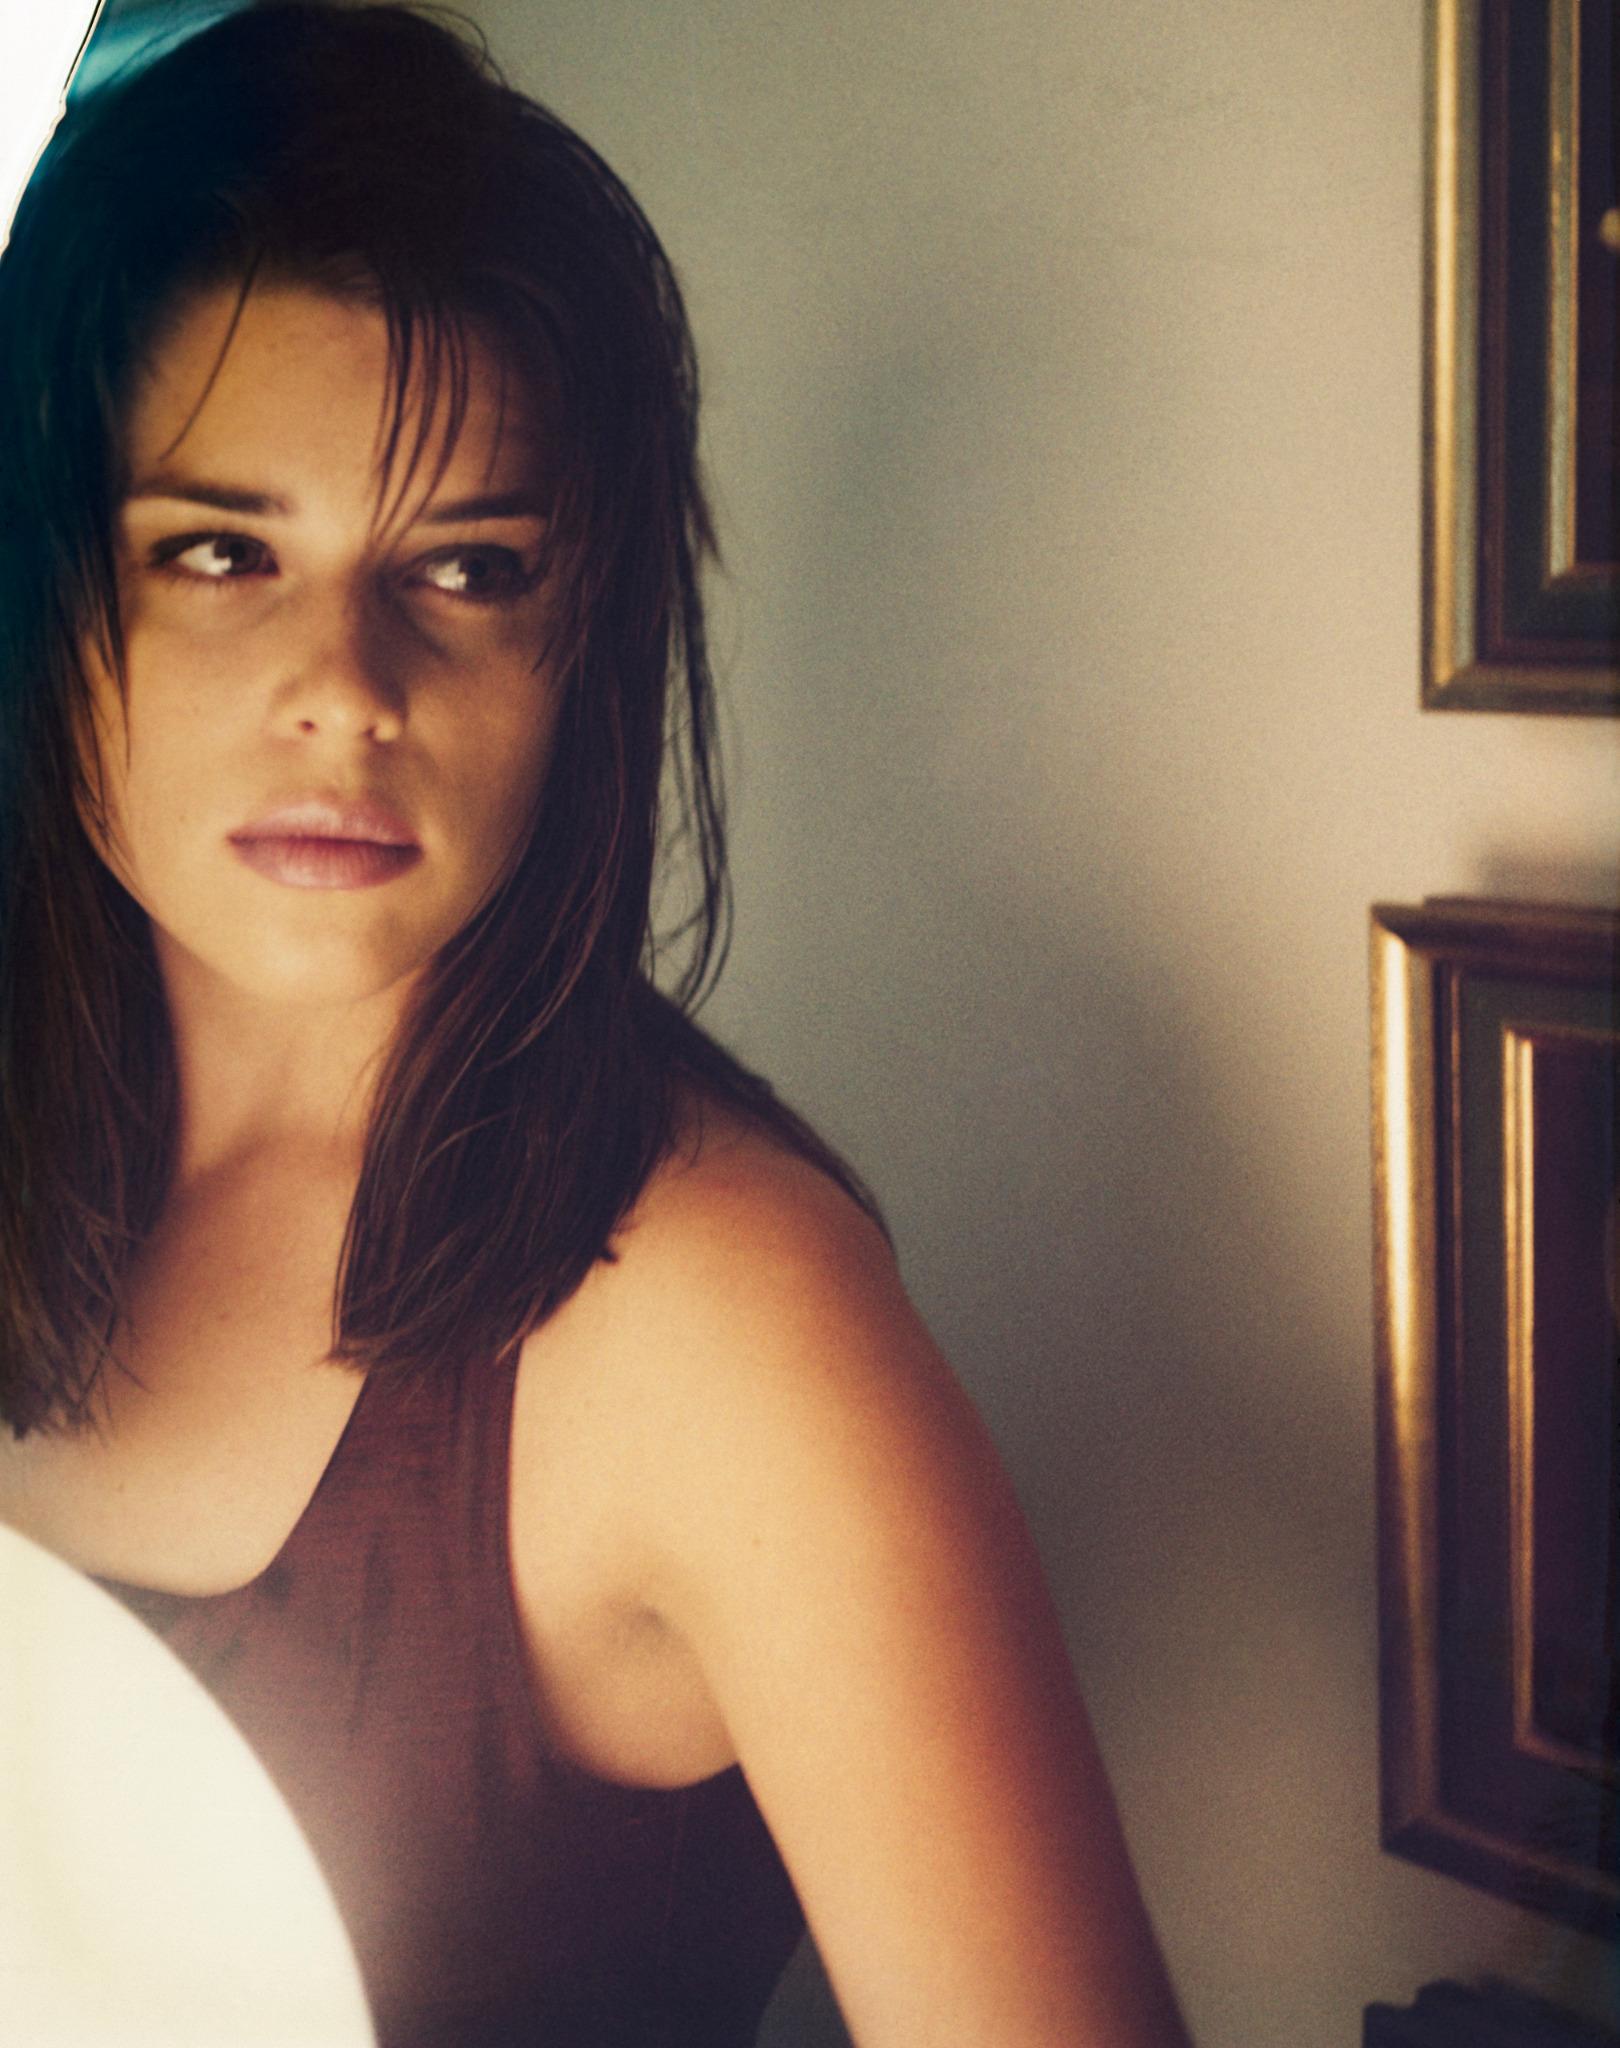 HAPPY BDAY, NEVE CAMPBELL! <3 